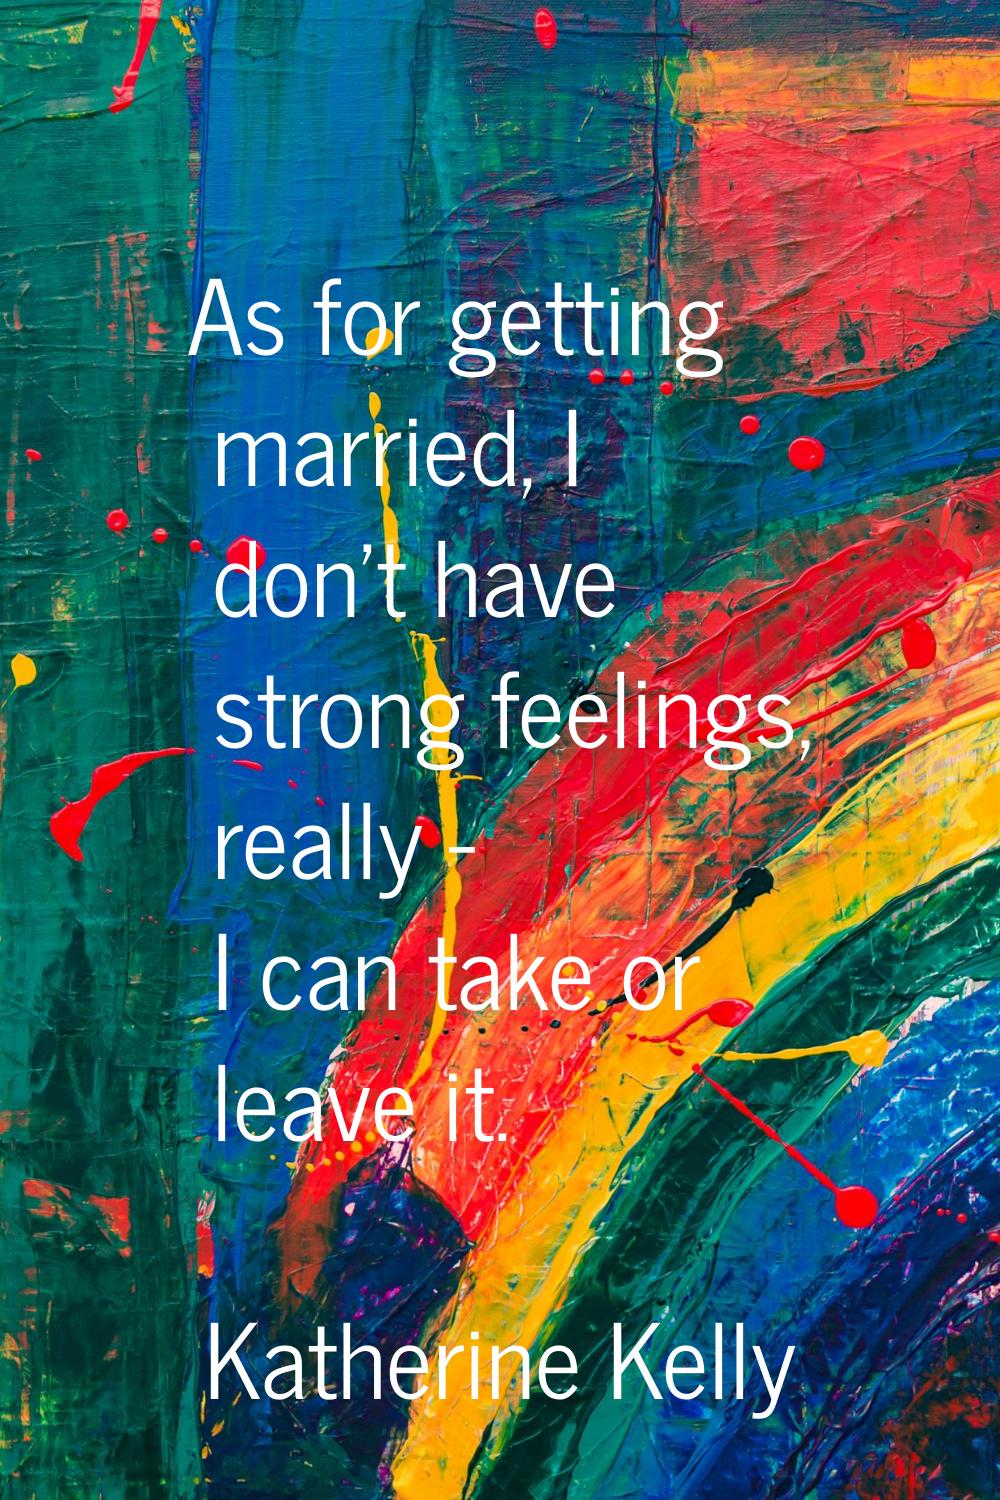 As for getting married, I don't have strong feelings, really - I can take or leave it.